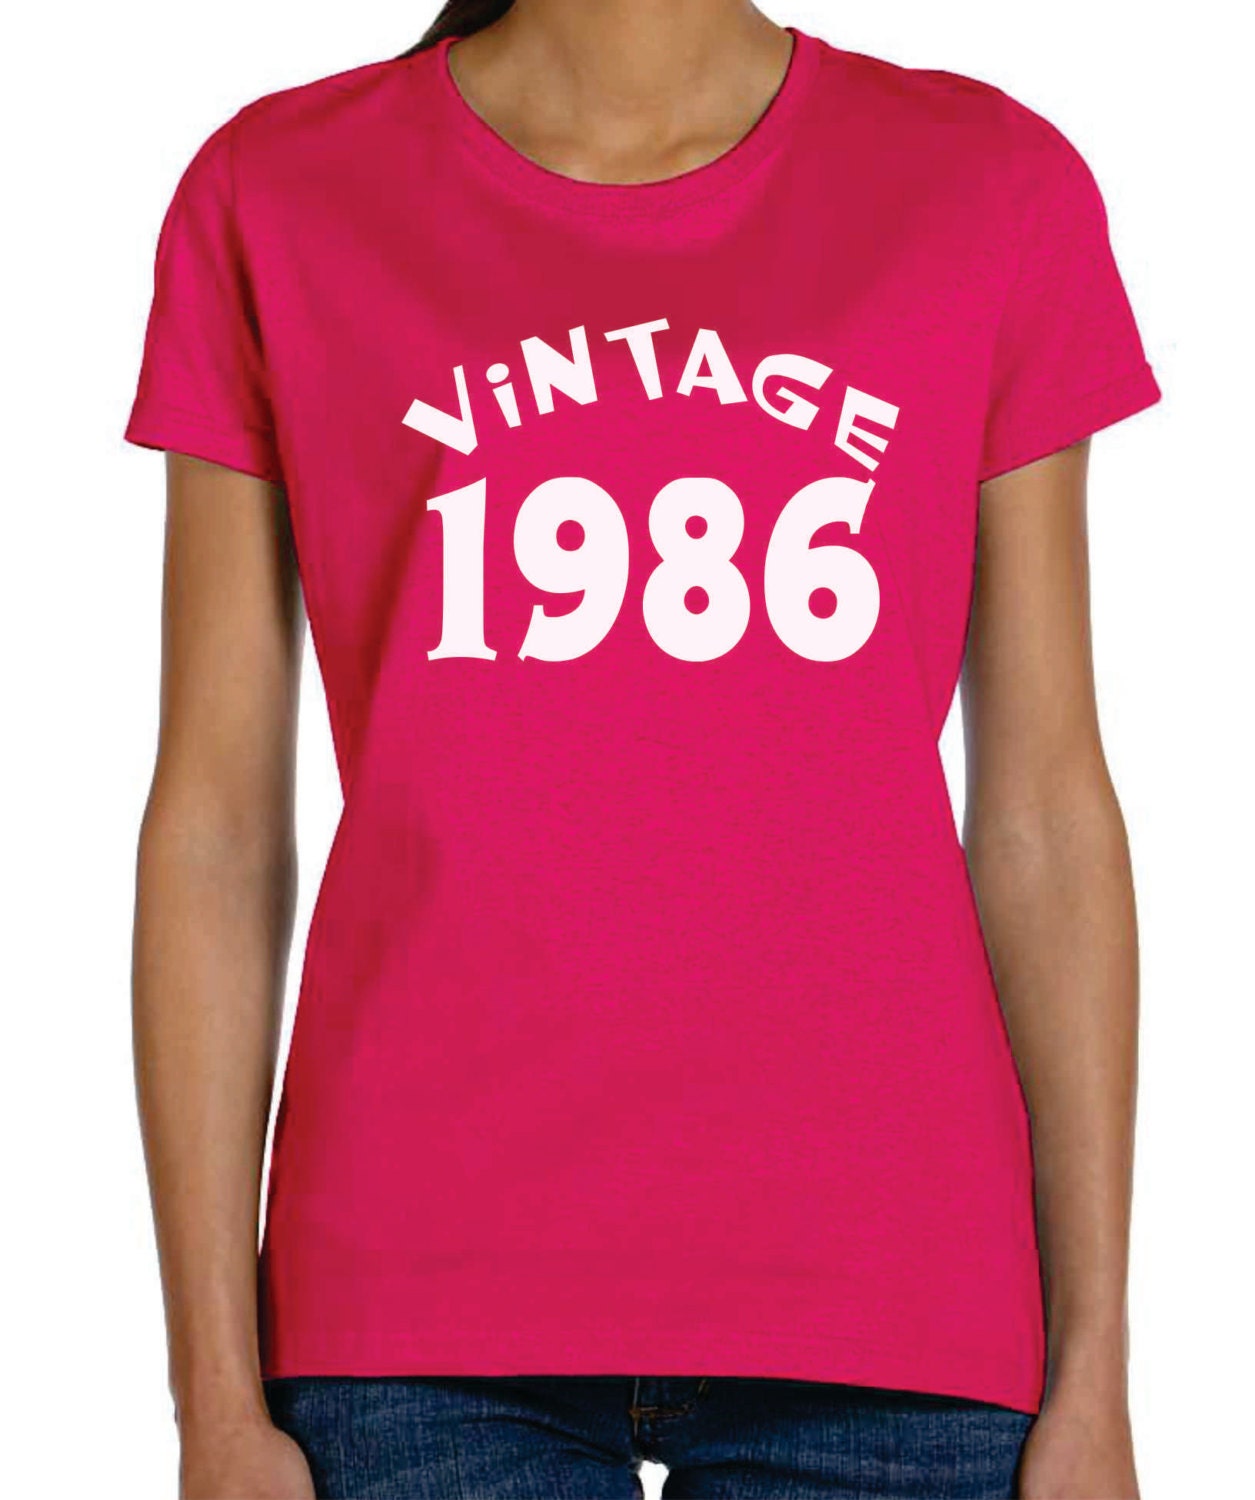 Vintage 1986 Adult 30th Birthday Shirt Available With Any Year